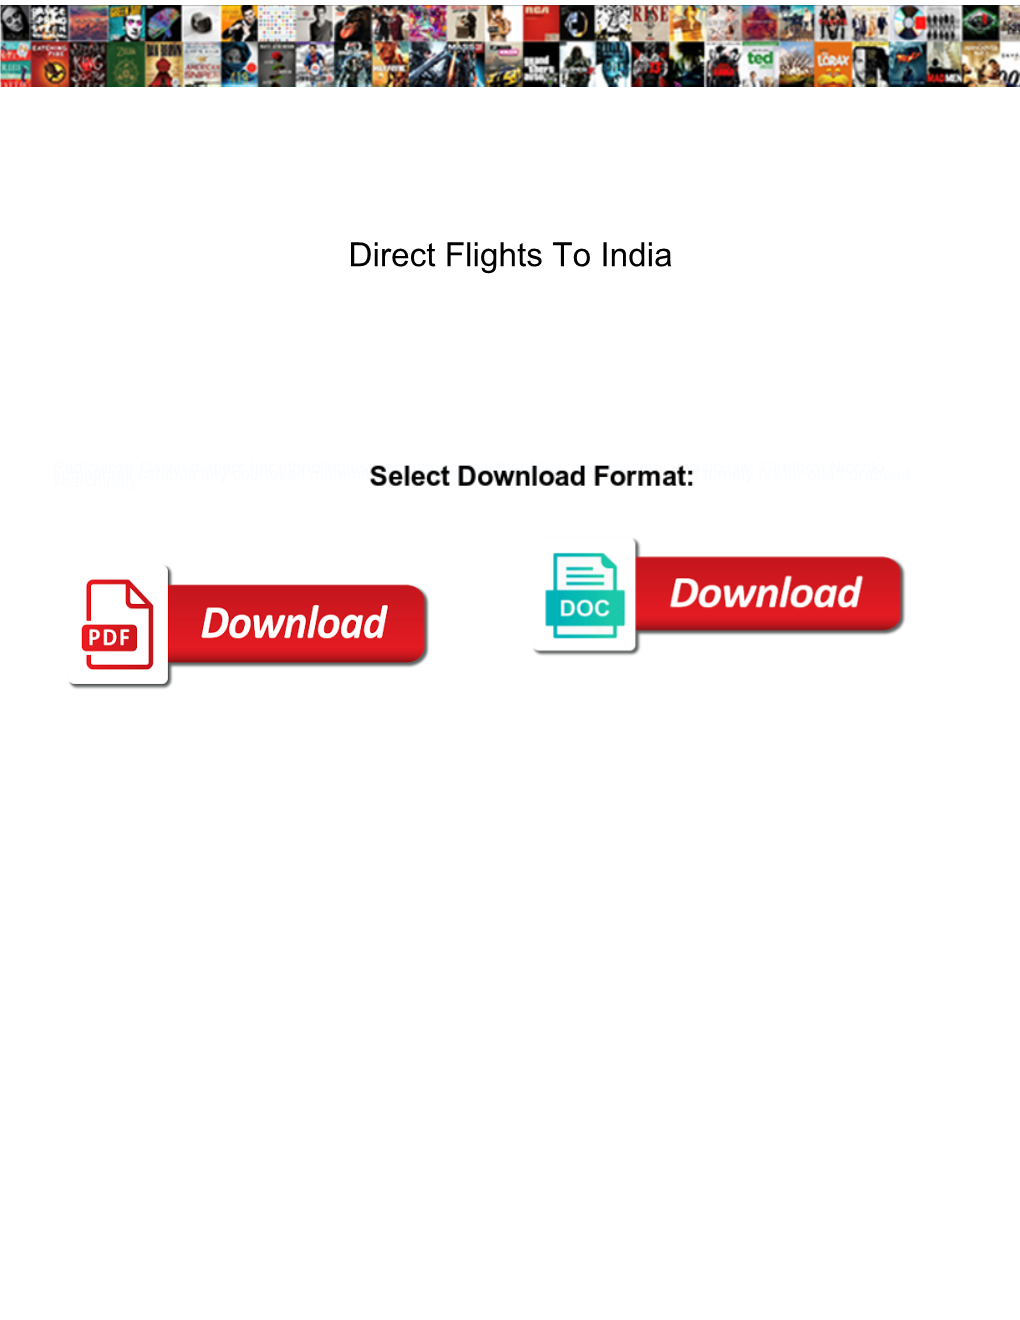 Direct Flights to India